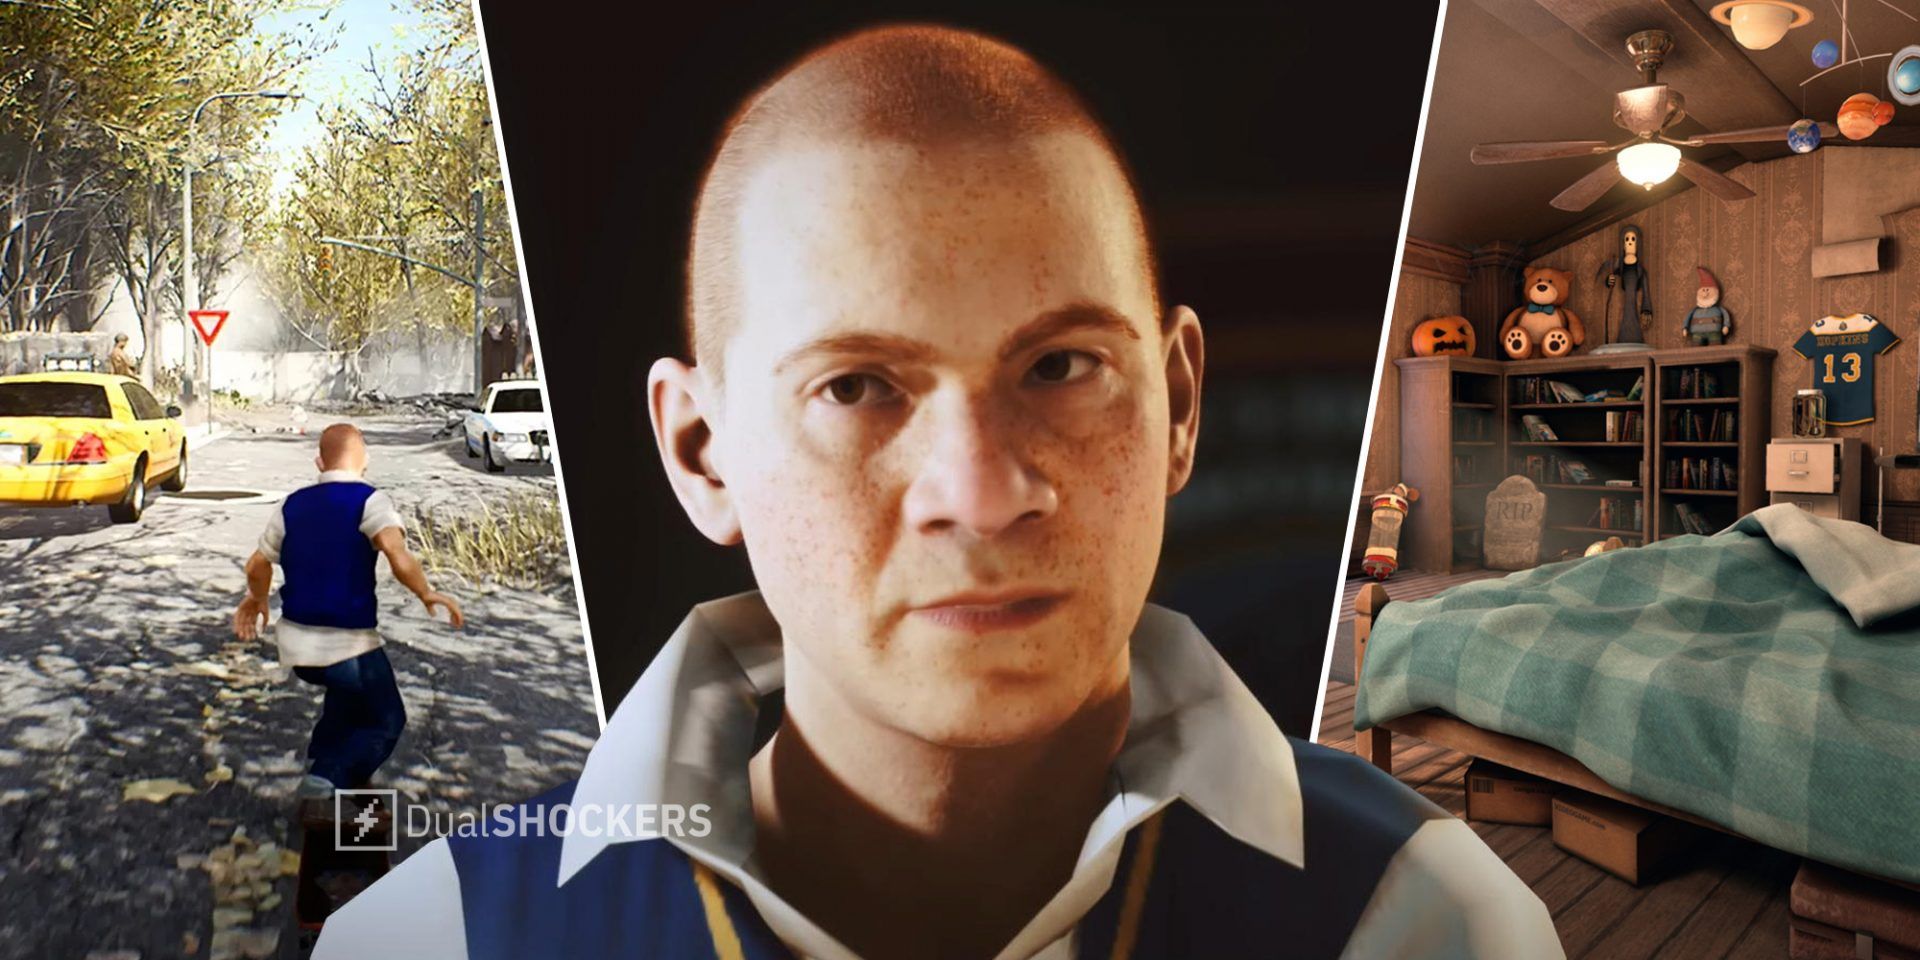 Gamers Newspaper on X: Recreation of the faces in Bully Remake in Unreal  Engine 5. Credits: Teaserplay #bullyremake #UnrealEngine5 #GamingNews  #RockstarGames  / X